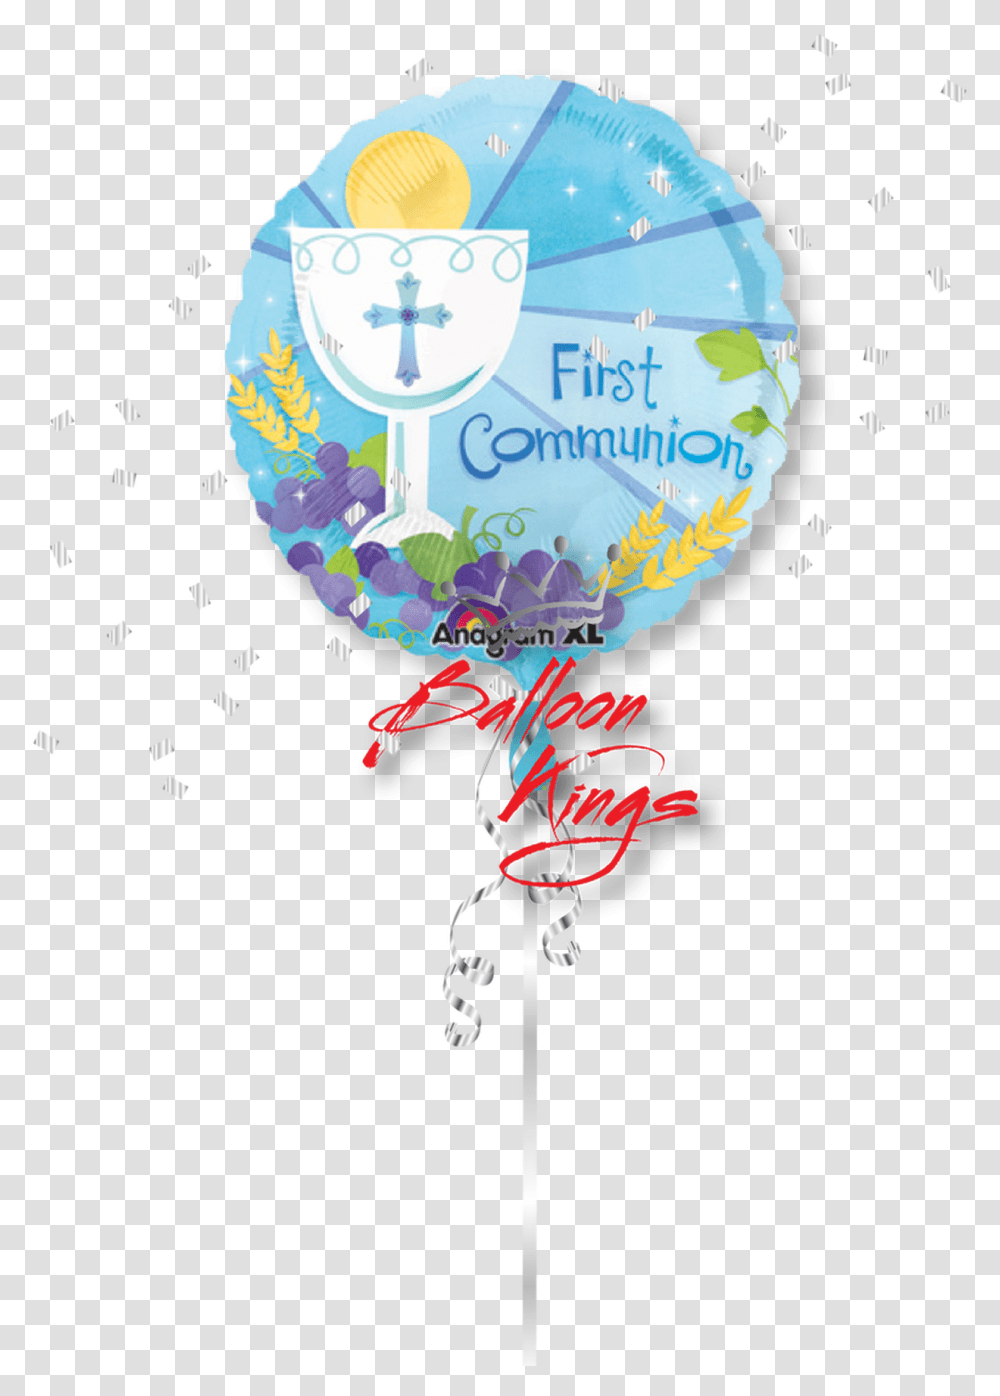 First Communion Chalice Boy First Communion, Ball, Paper, Balloon, Confetti Transparent Png